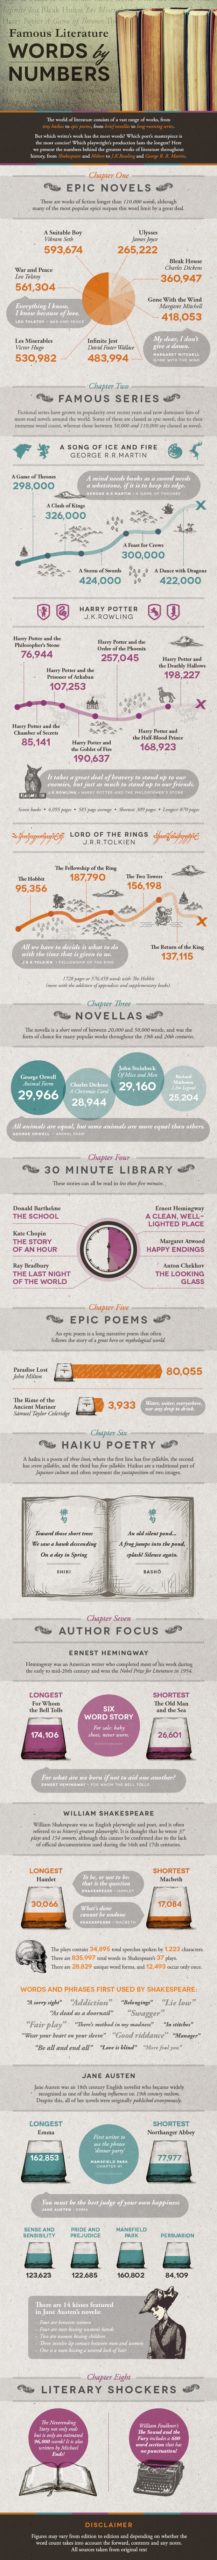 word count of famous novels -infographic